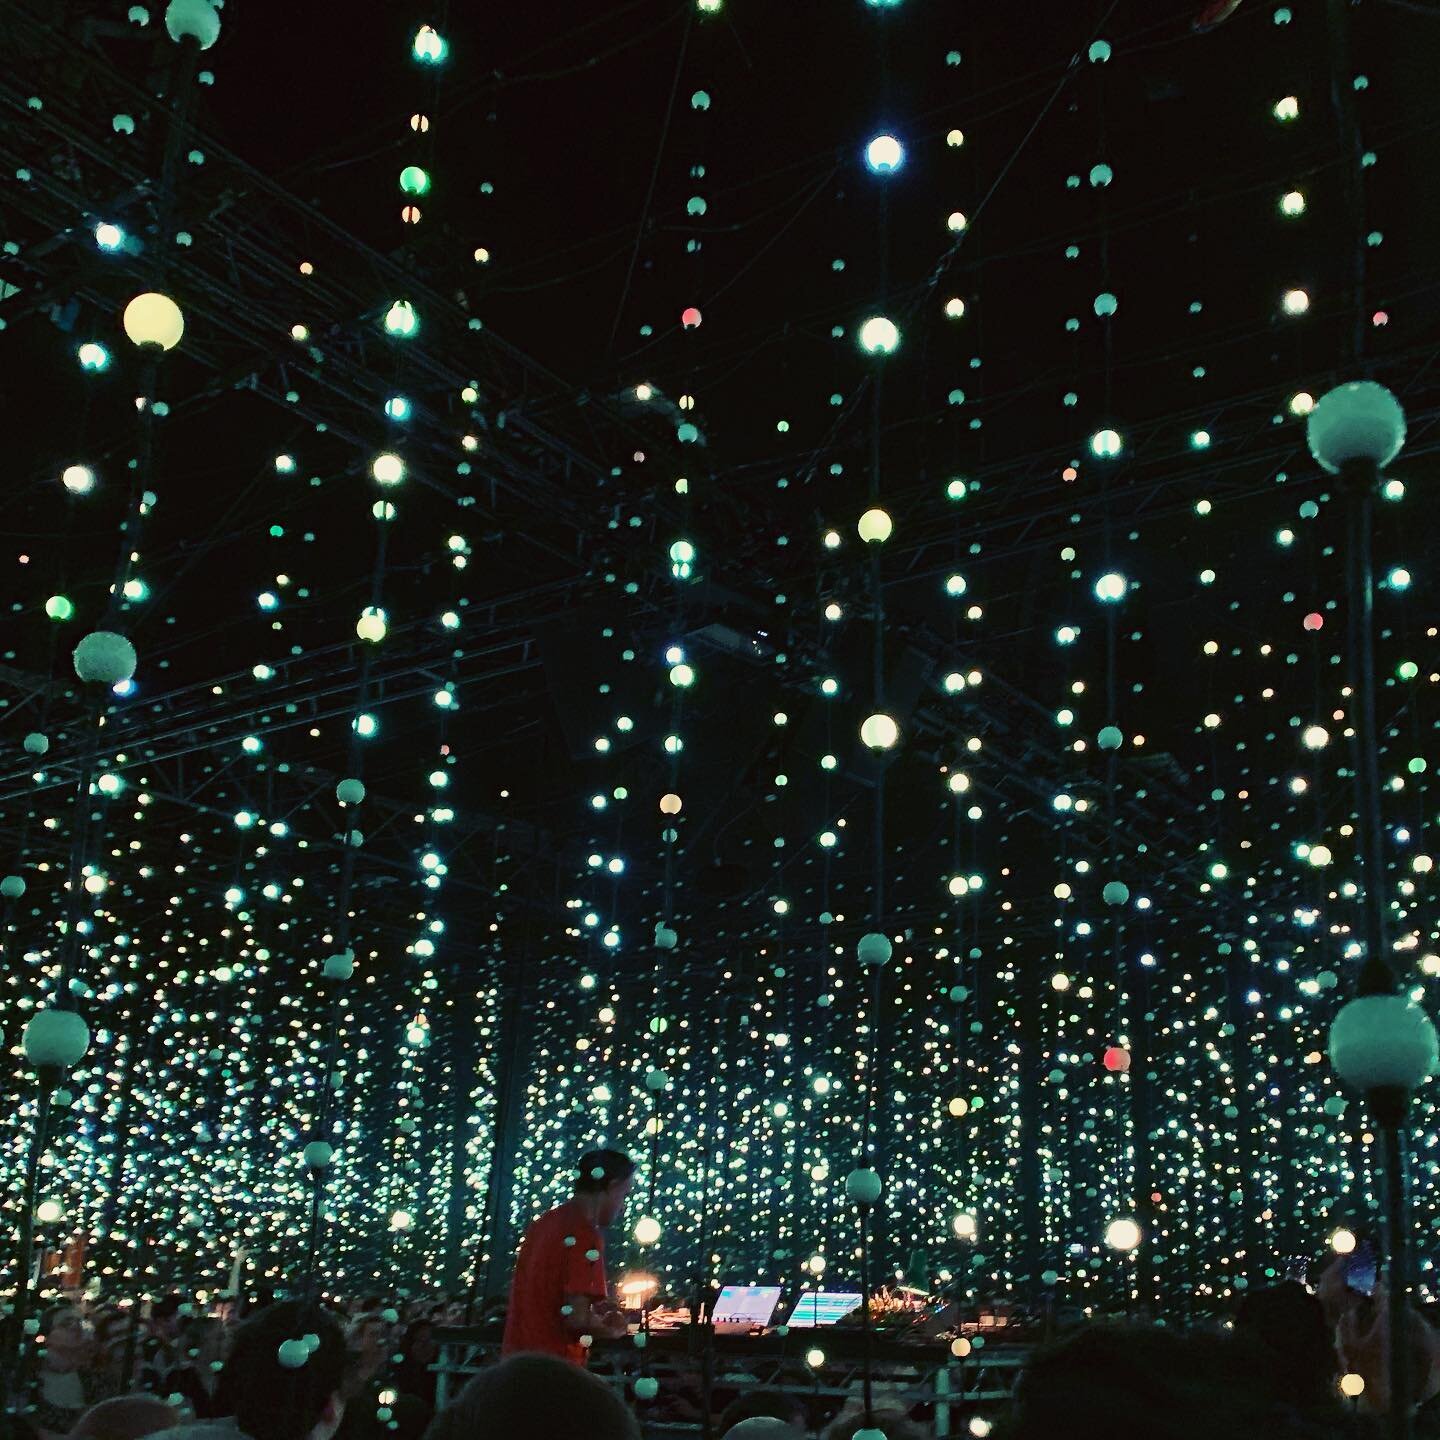 Saw @fourtetkieran at Ally Pally last night. Uplifting and soul-soothing sounds, with amazing immersive light installation by @squidie. Great company, a bit of dancing, and an unexpected conversation with a stranger about person-centred therapy! A jo